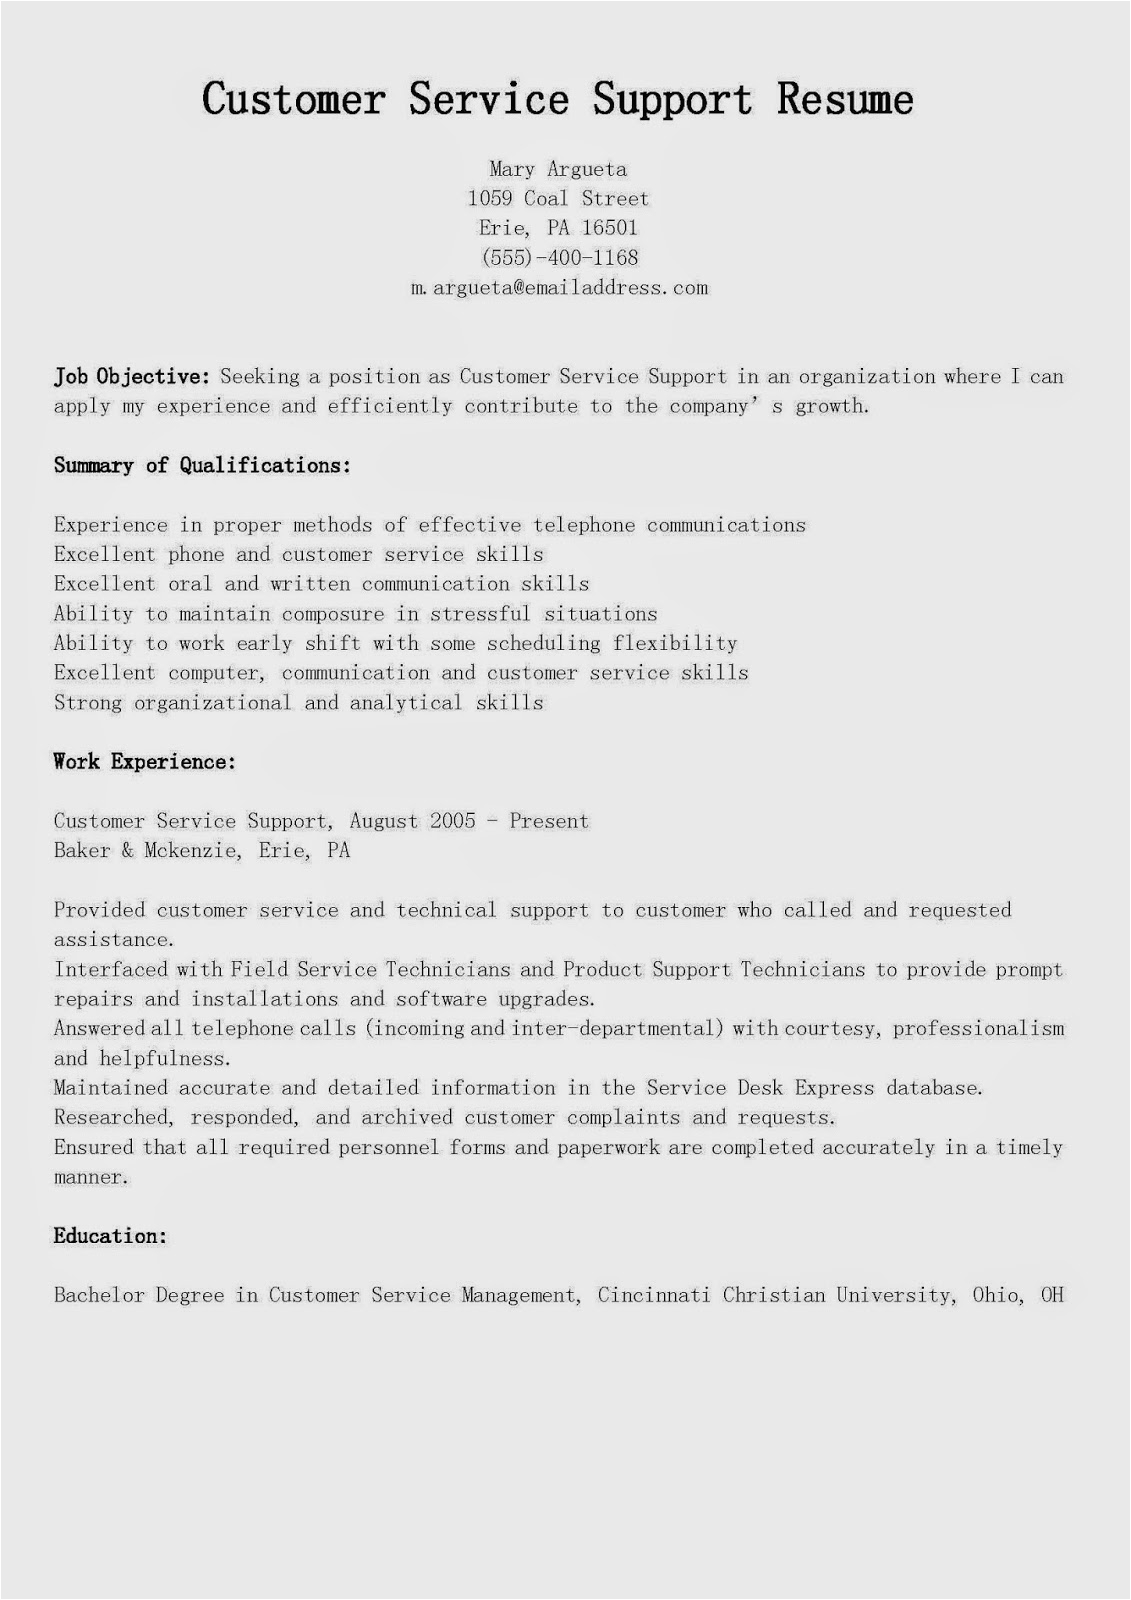 Customer Service Technical Support Sample Resume Resume Samples Customer Service Support Resume Sample